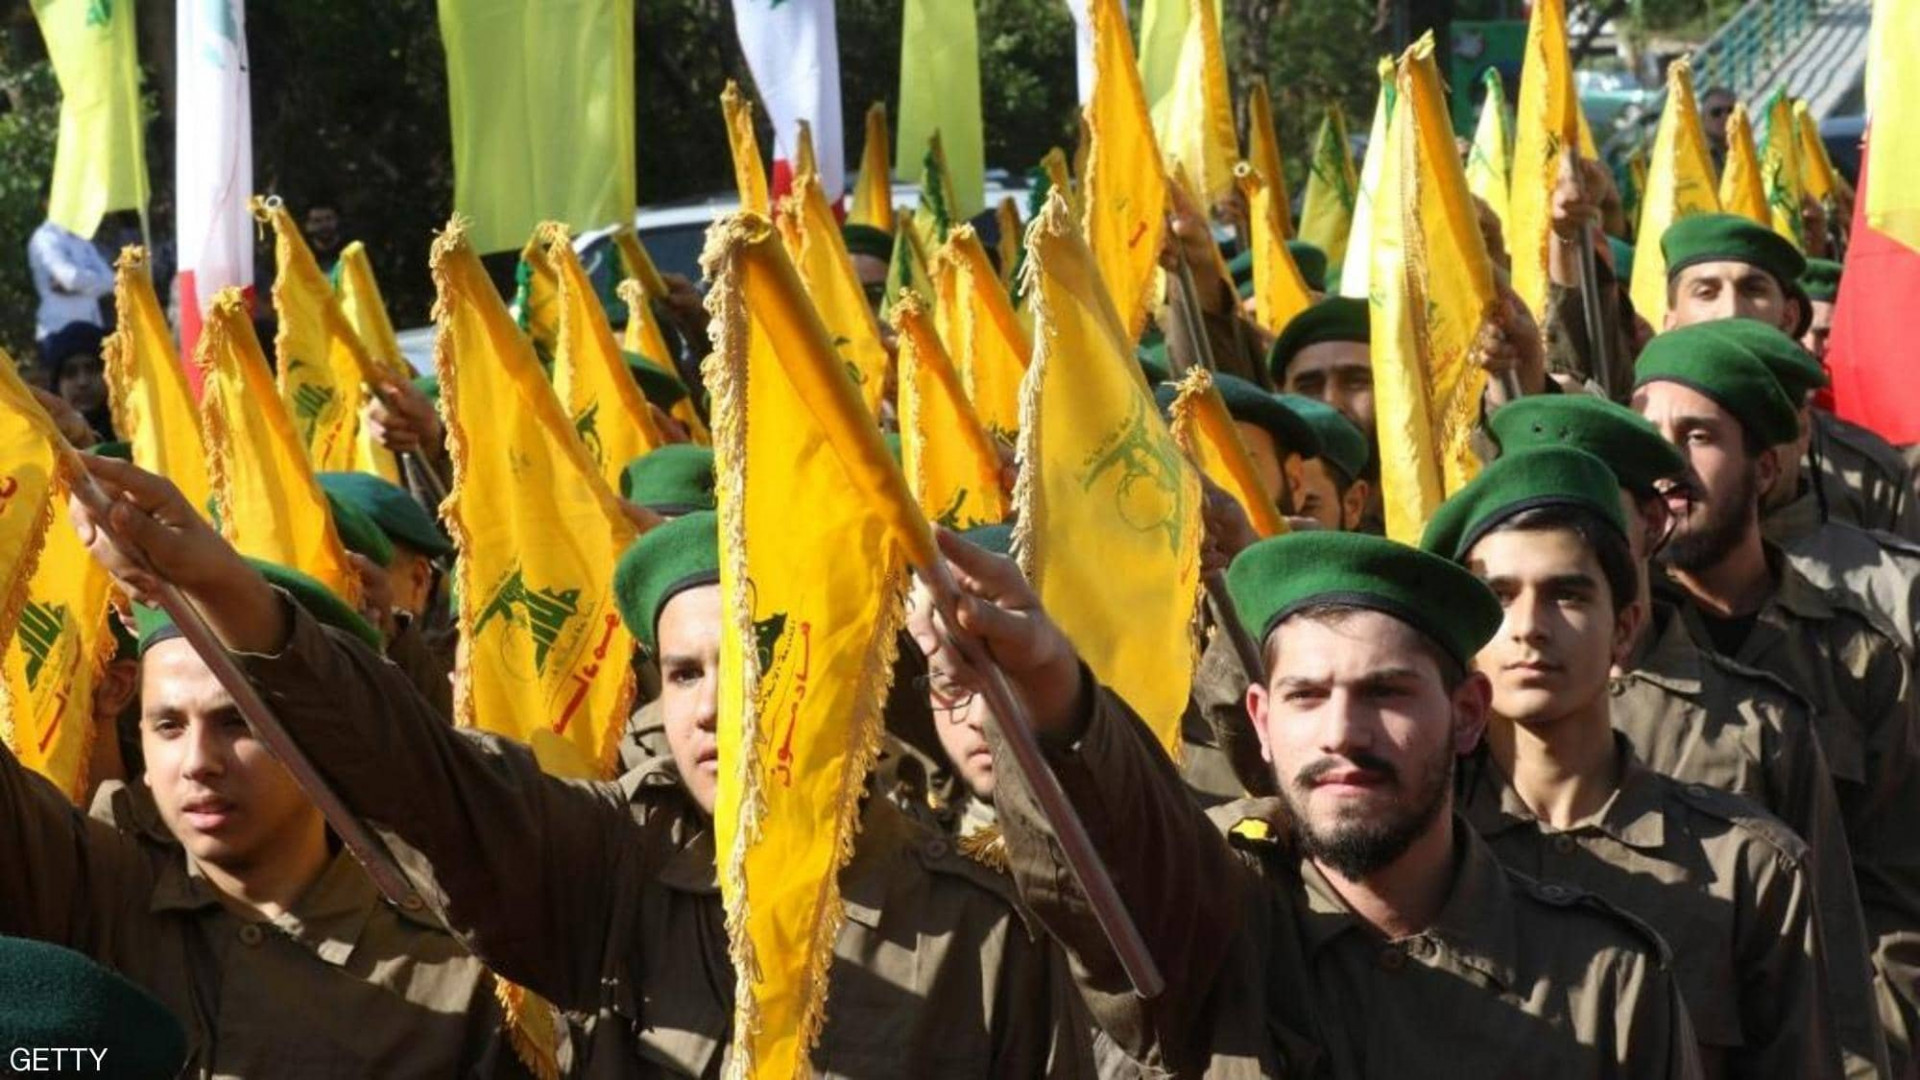 U.S. issues sanctions tied to supporters of Hezbollah, Iran